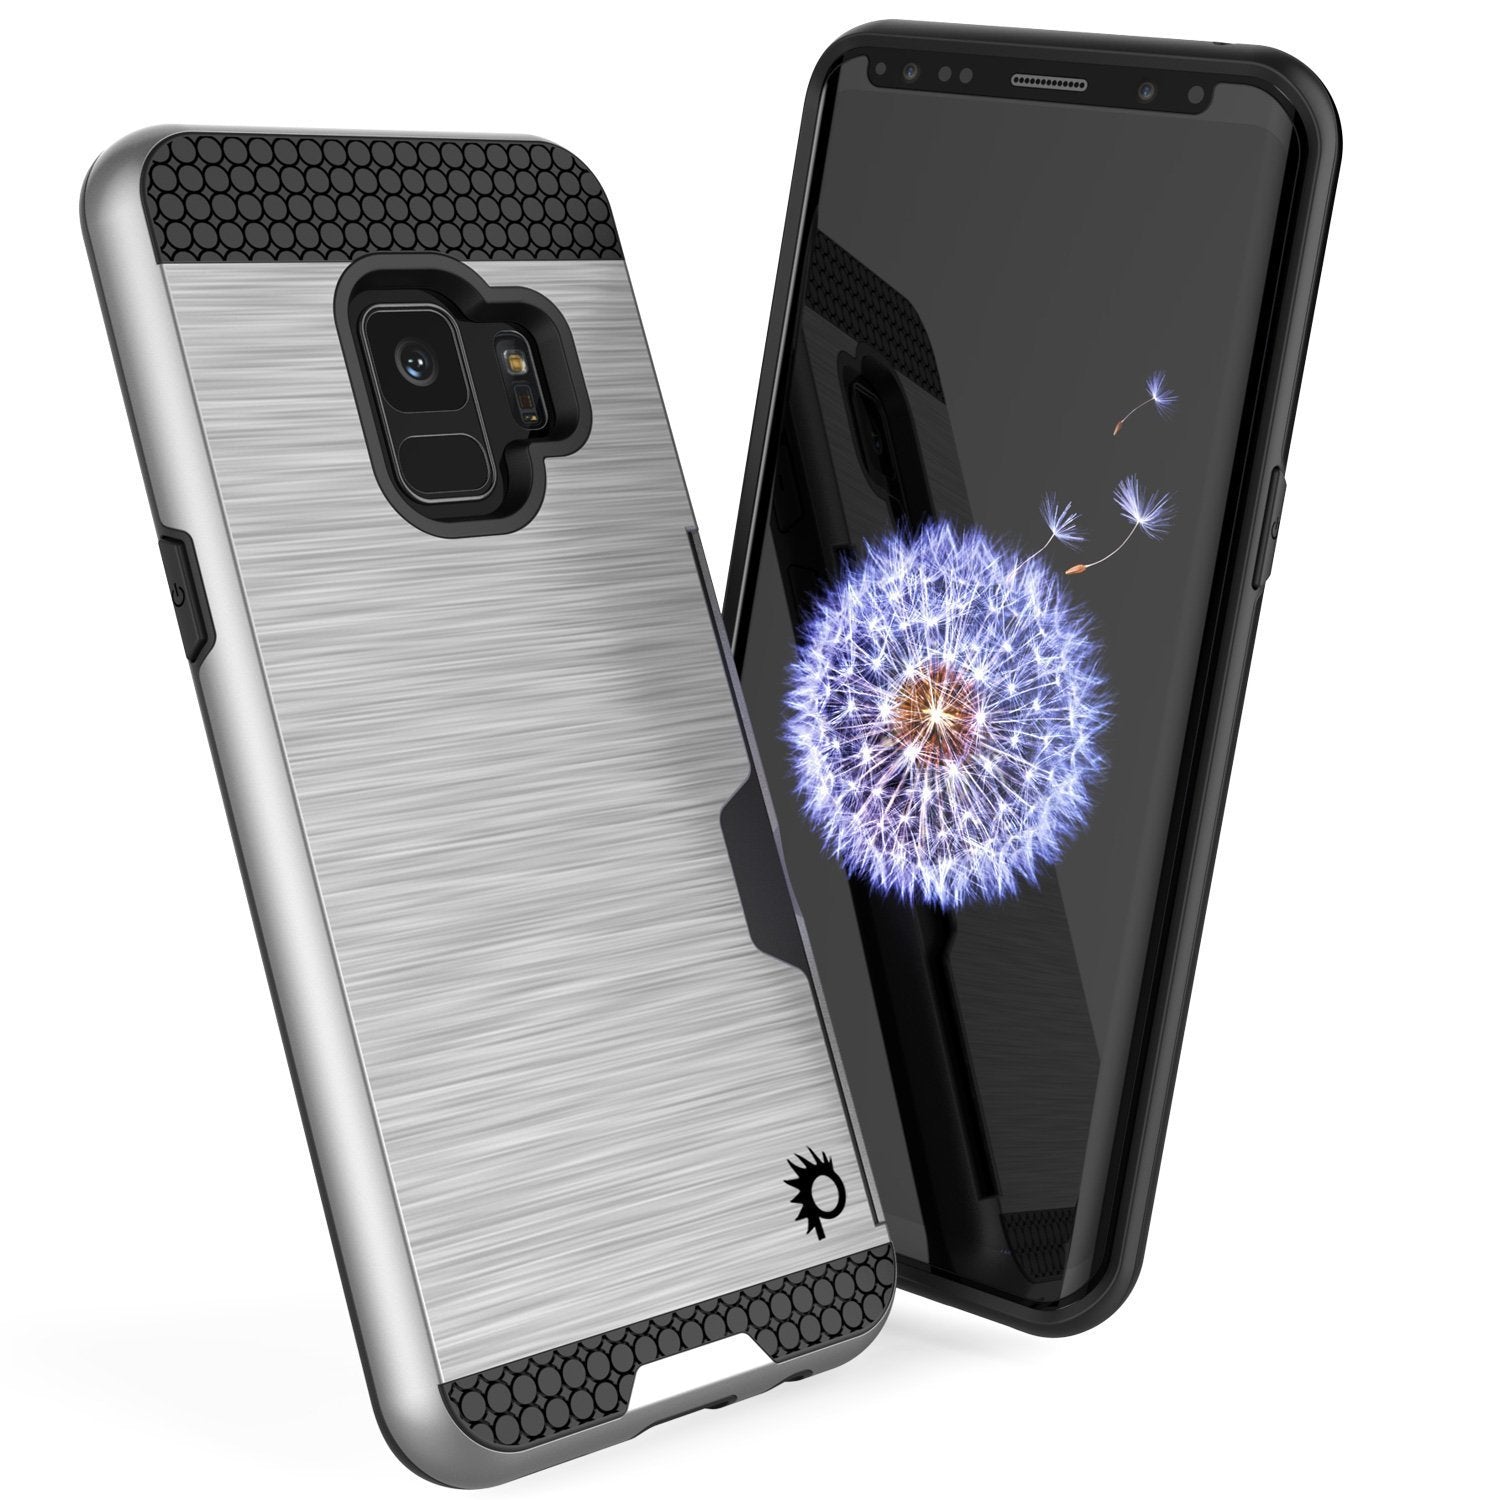 Galaxy S9 Case, PUNKcase [SLOT Series] [Slim Fit] Dual-Layer Armor Cover w/Integrated Anti-Shock System, Credit Card Slot [Silver]